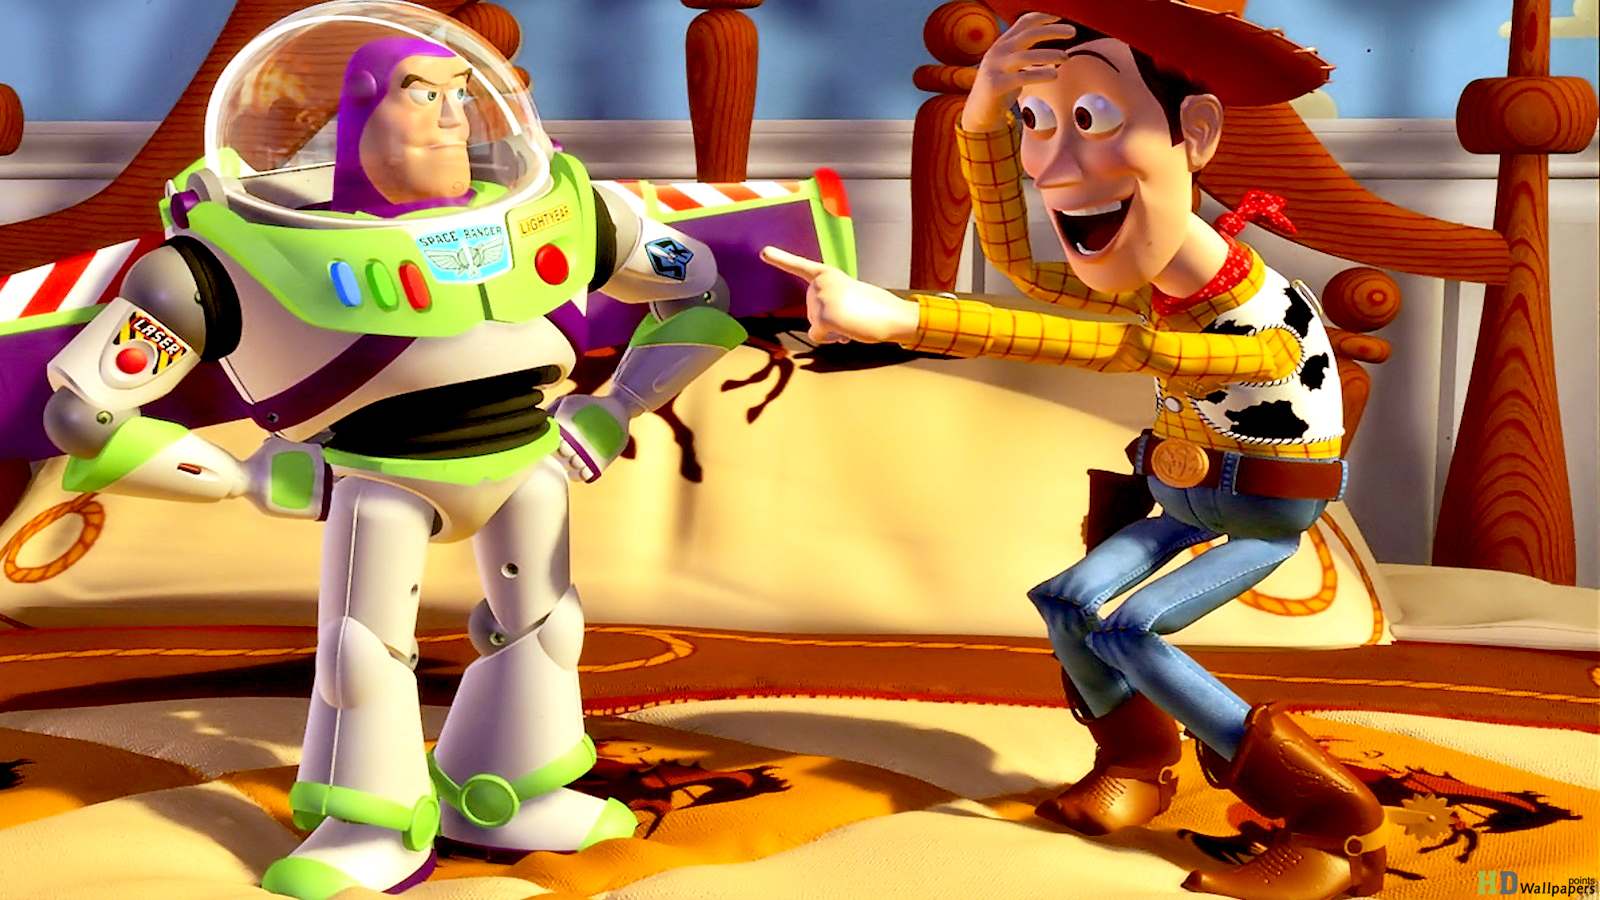 Top 999+ Toy Story Wallpaper Full HD, 4K✓Free to Use